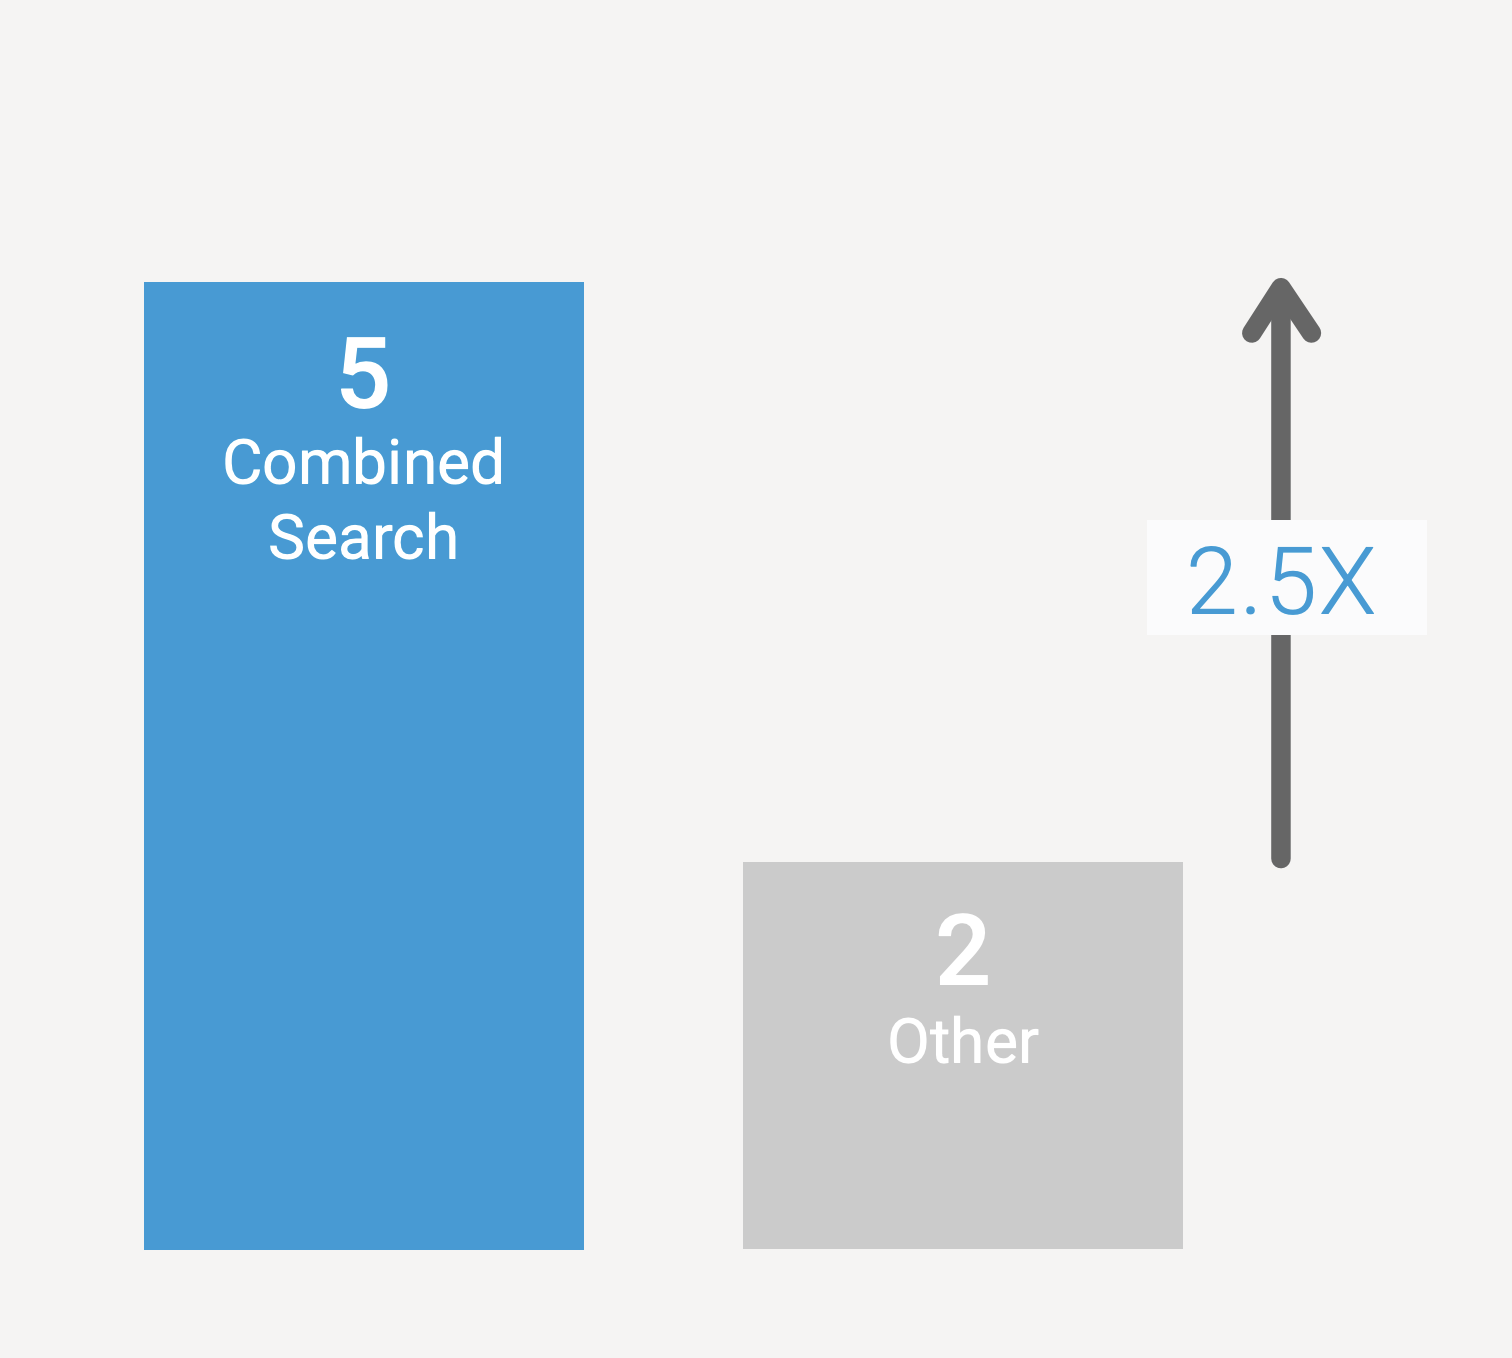 A bar chart showing combined search reach vs other types of reach